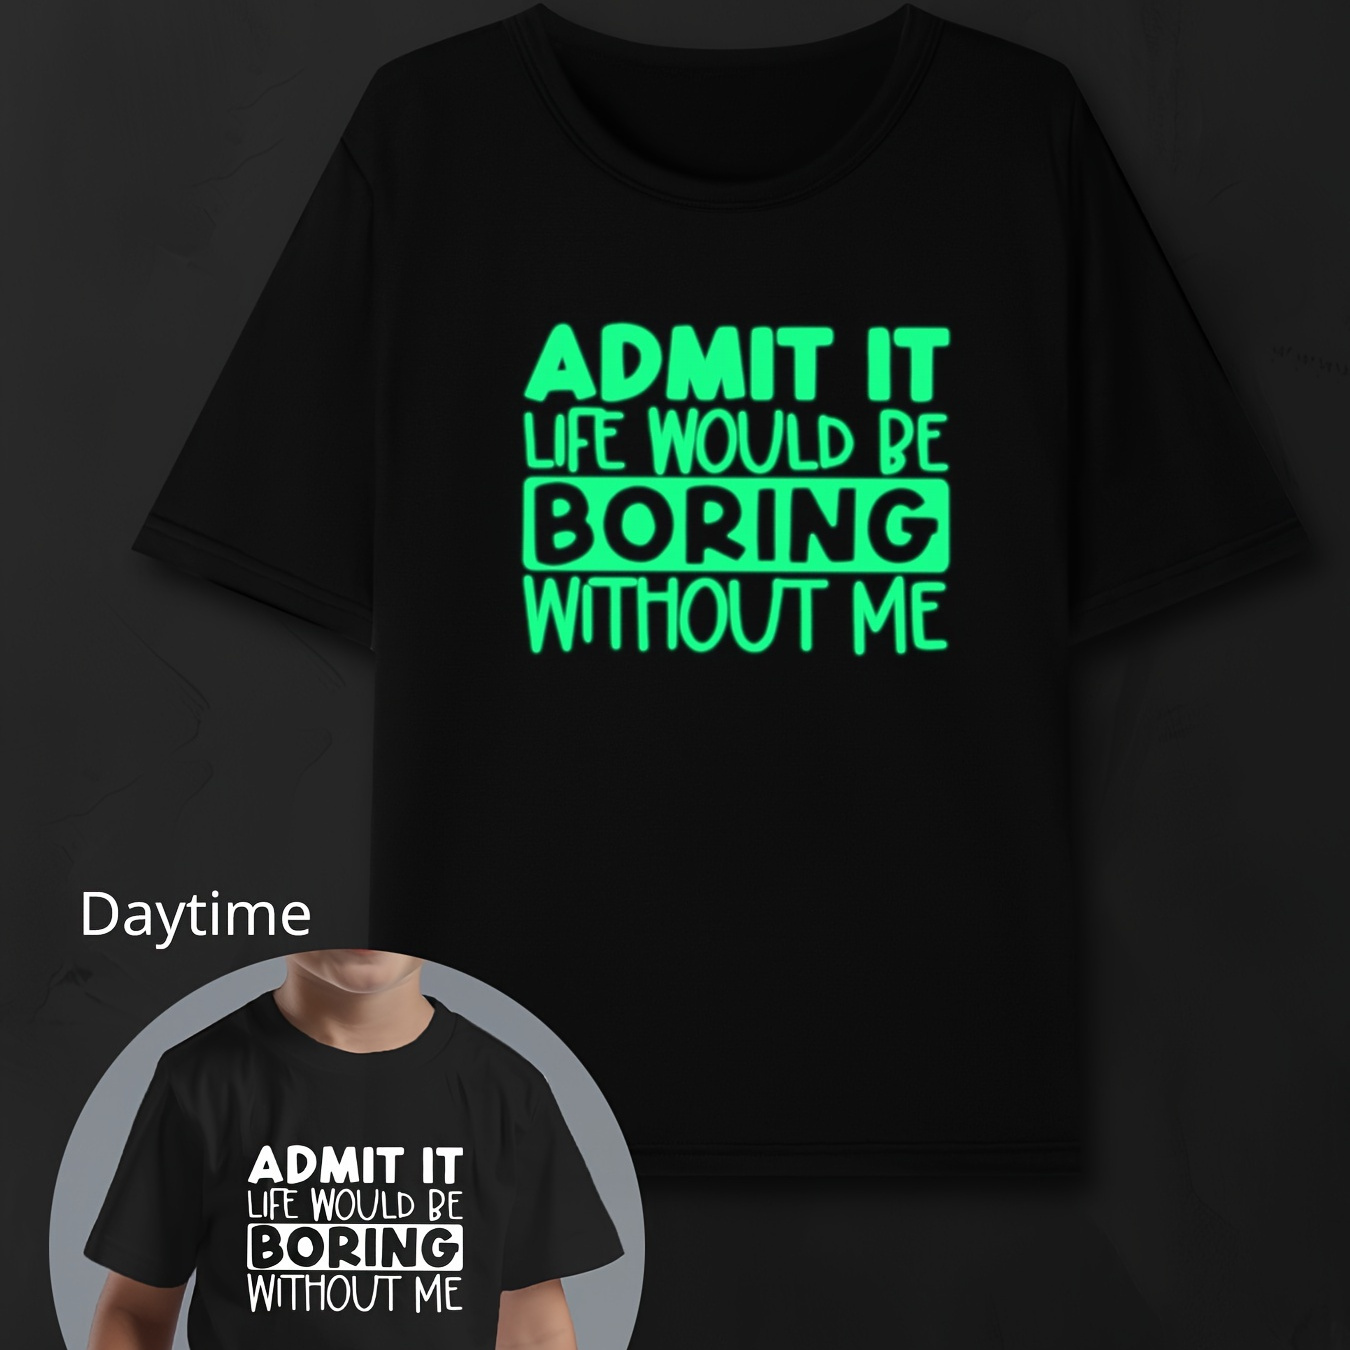 

Trendy Comfy Boy's Summer Top - Admit It Life Would Be Boring Without Me Luminous Print Short Sleeve Crew Neck T-shirt - Versatile Daily Sporty Tee Gift